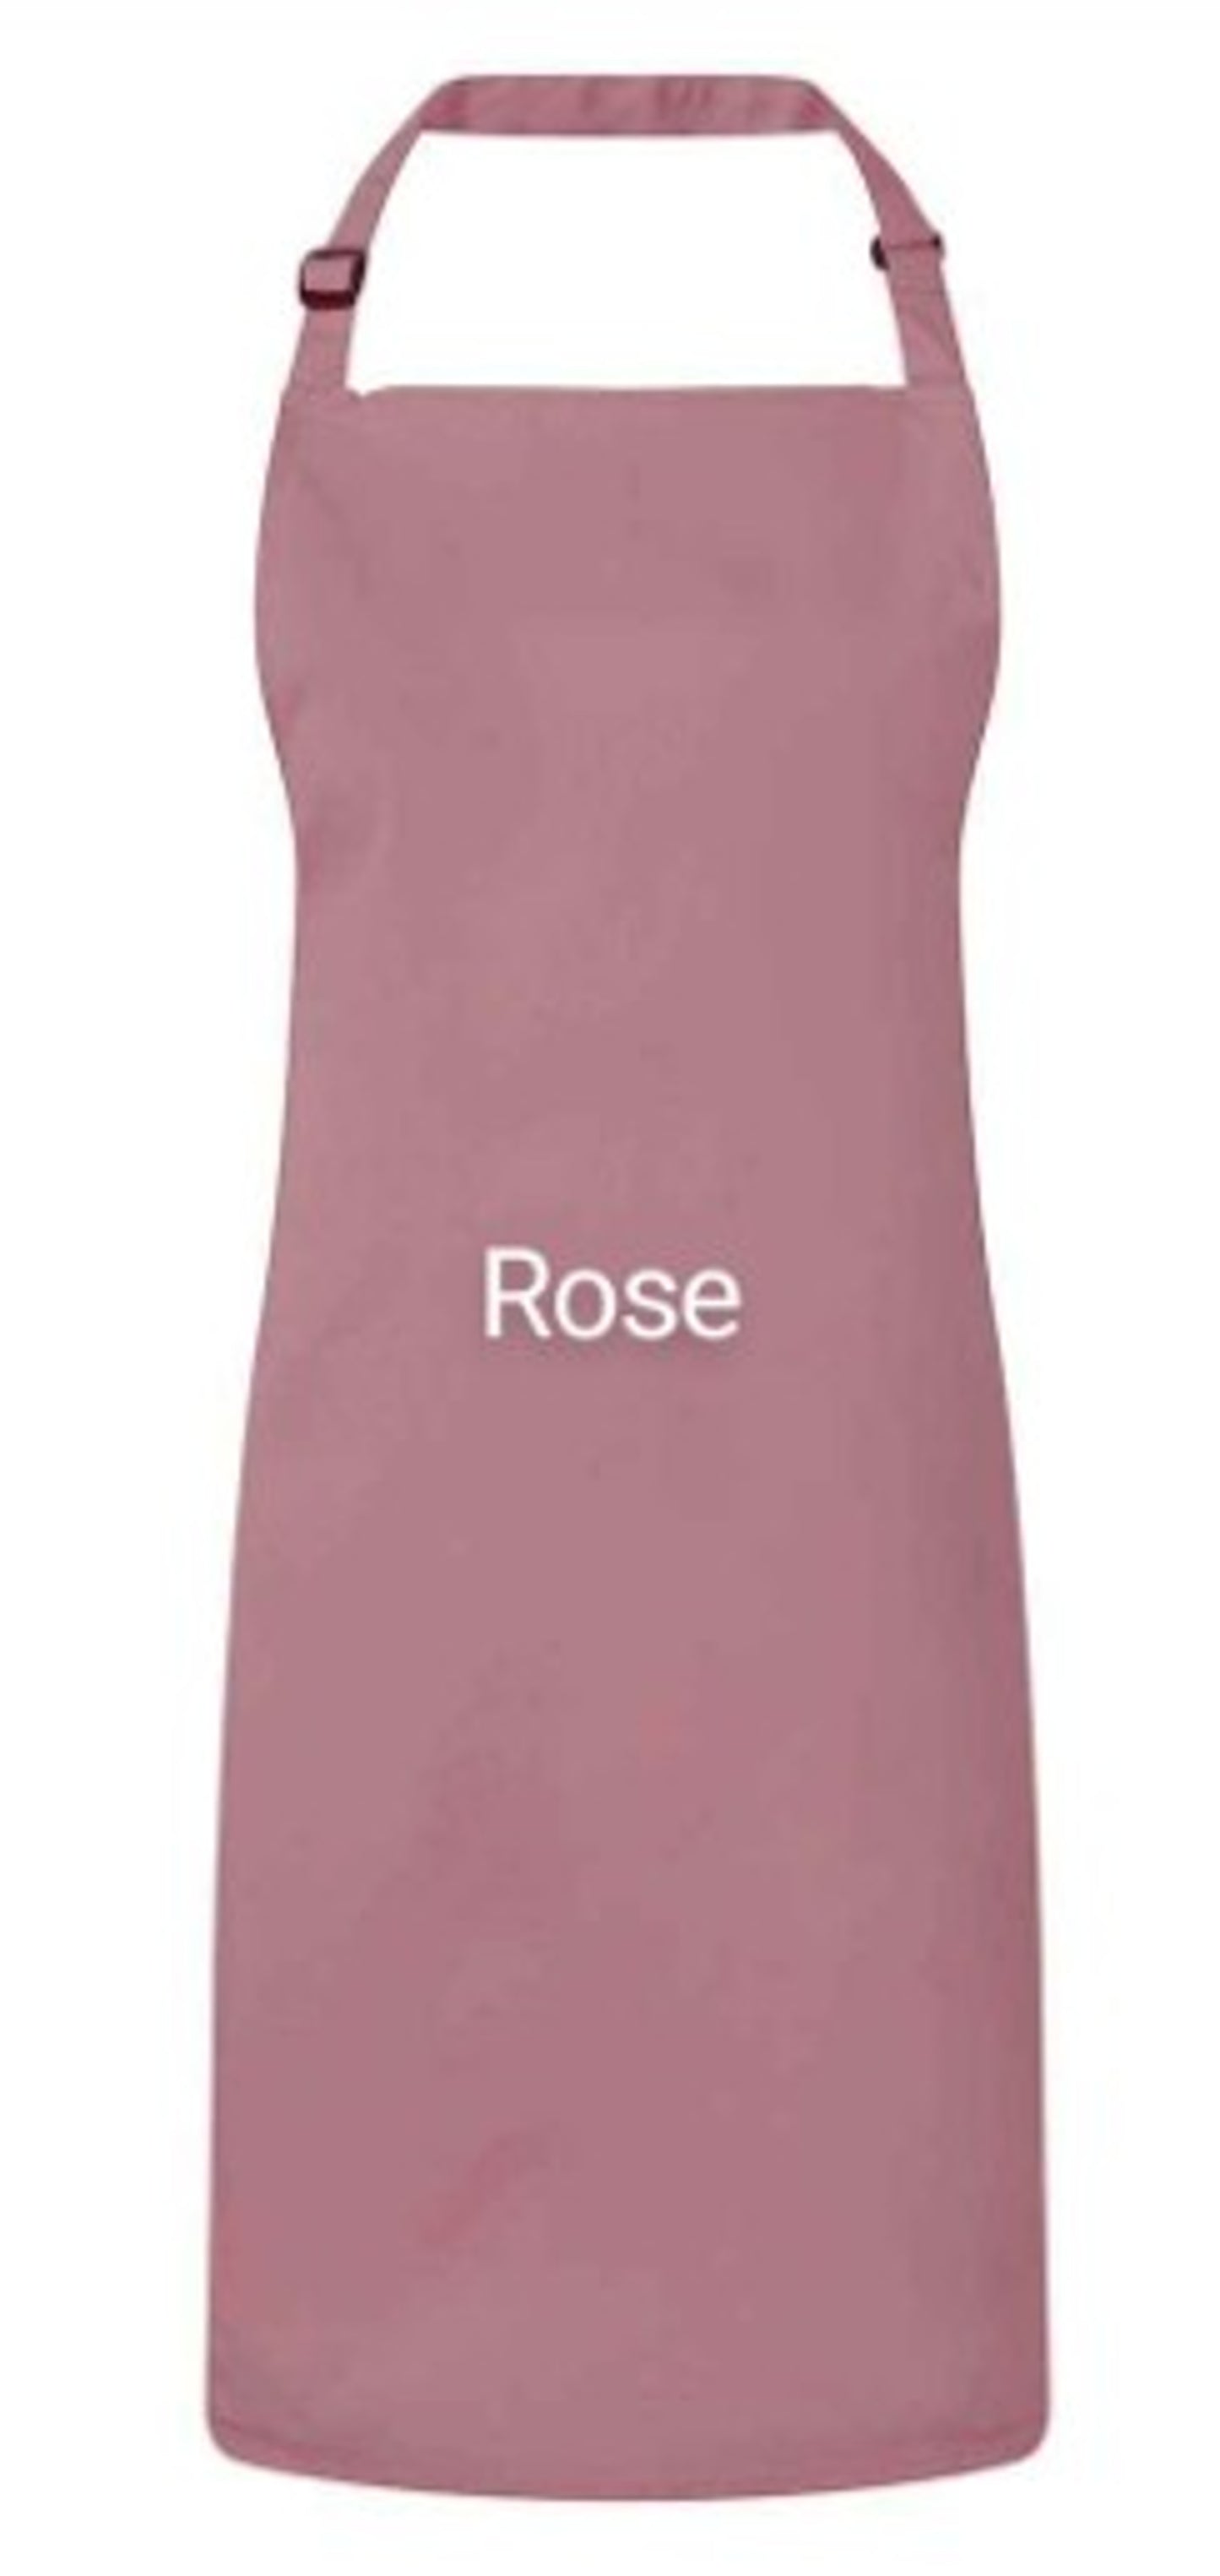 Embroidered Purple Rose Adults Unisex Apron with Adjustable Buckle